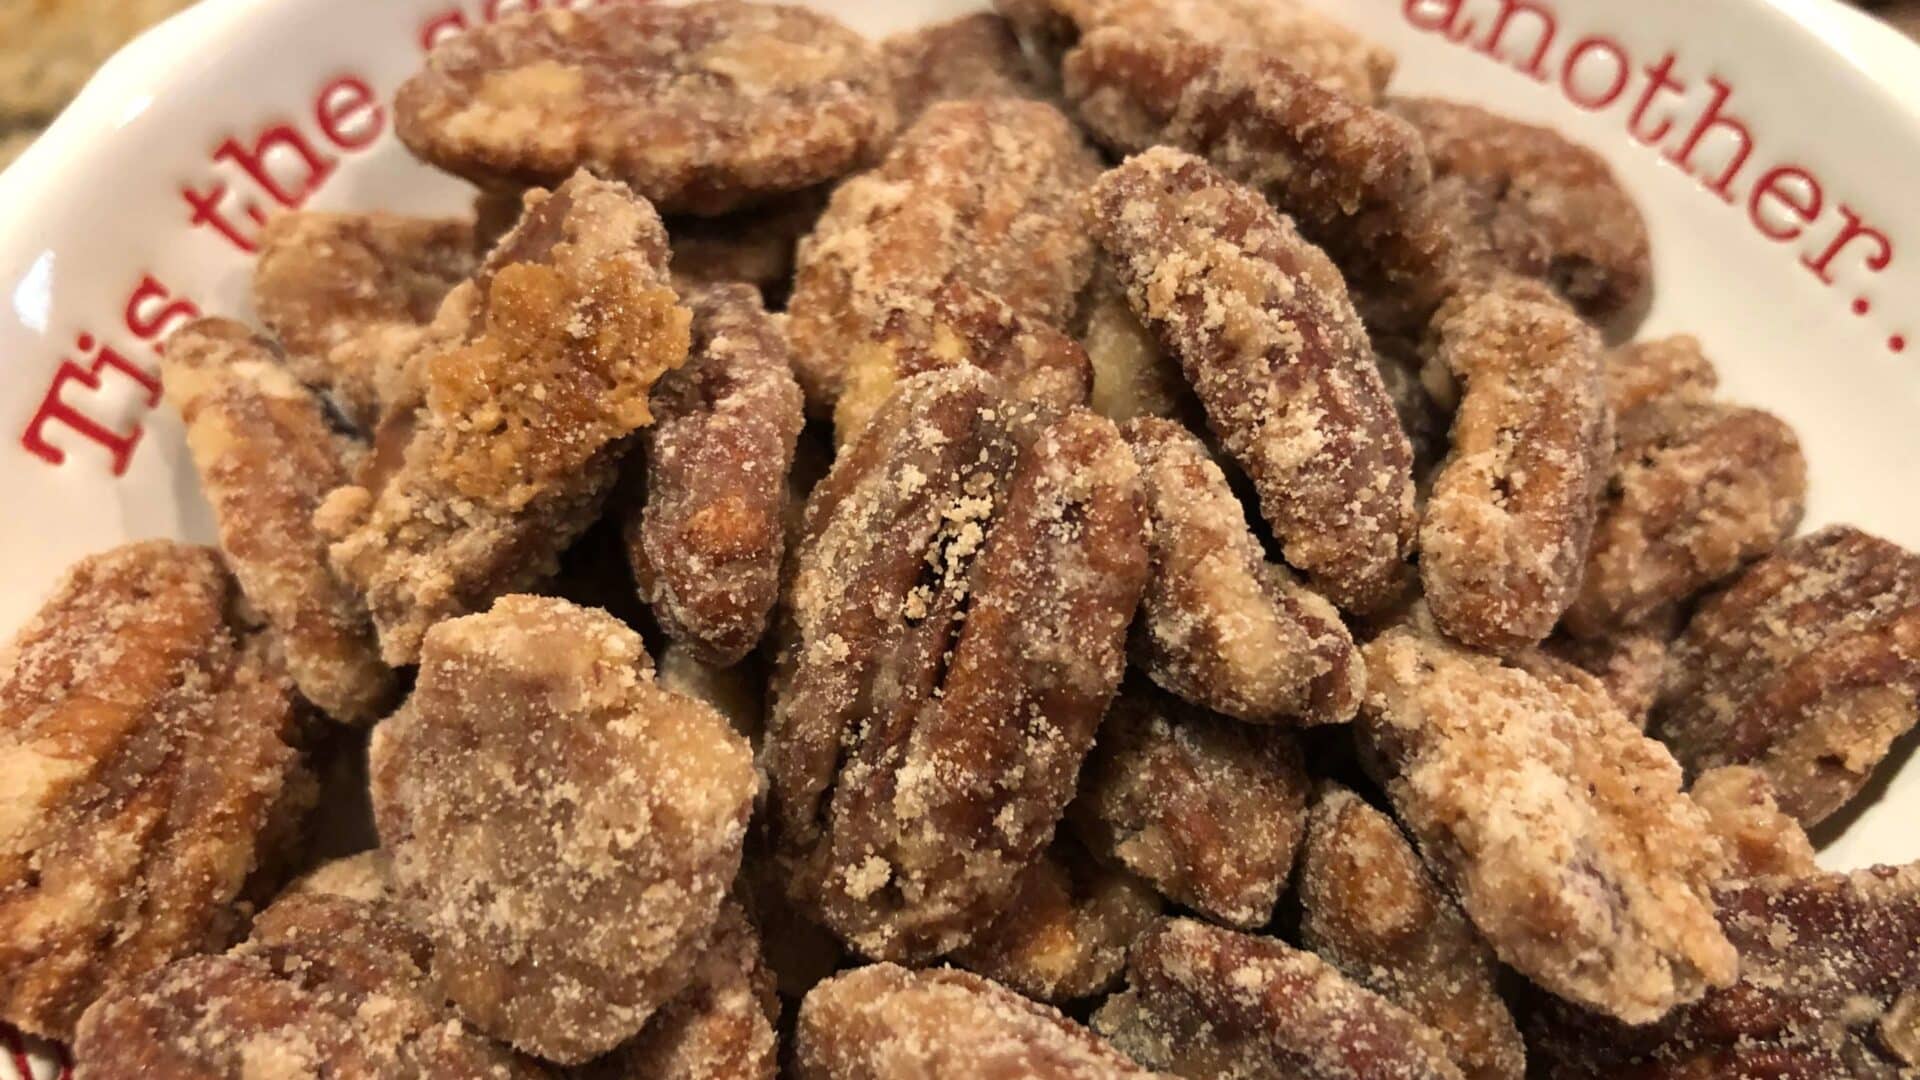 Pecans coated with sugar and cinnamon